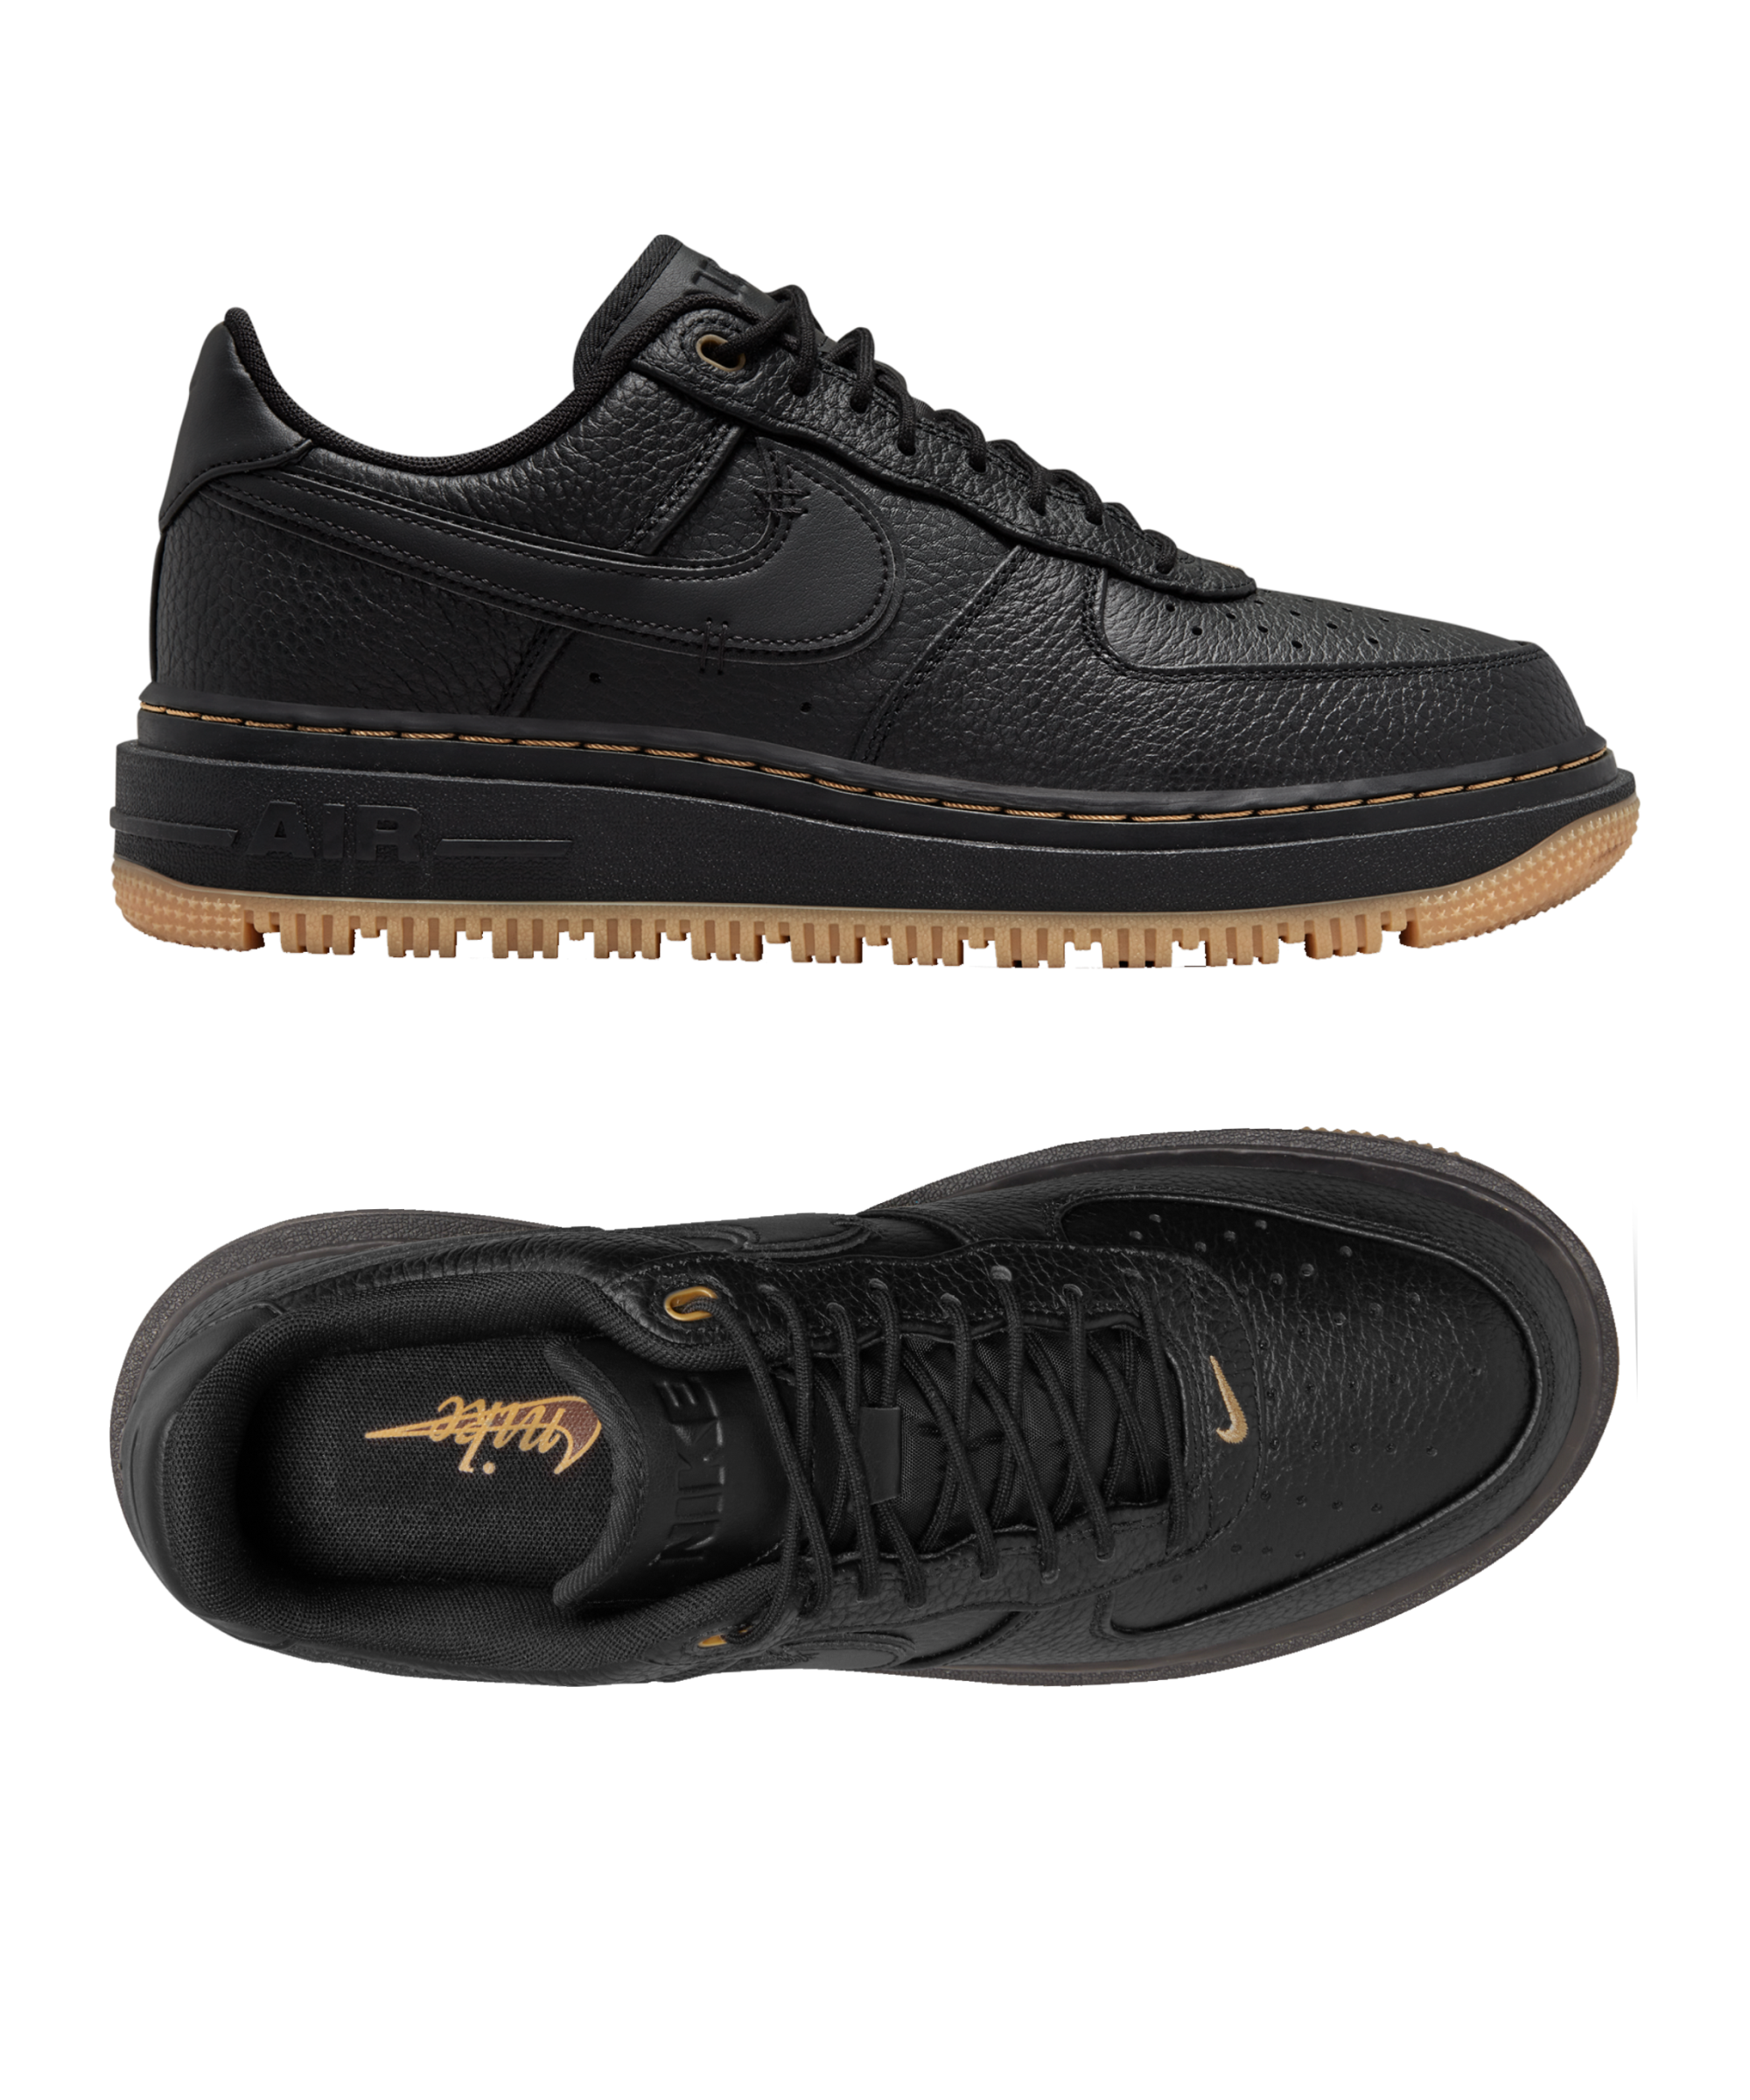 Aside Objection silk Nike Air Force 1 Luxe - Black